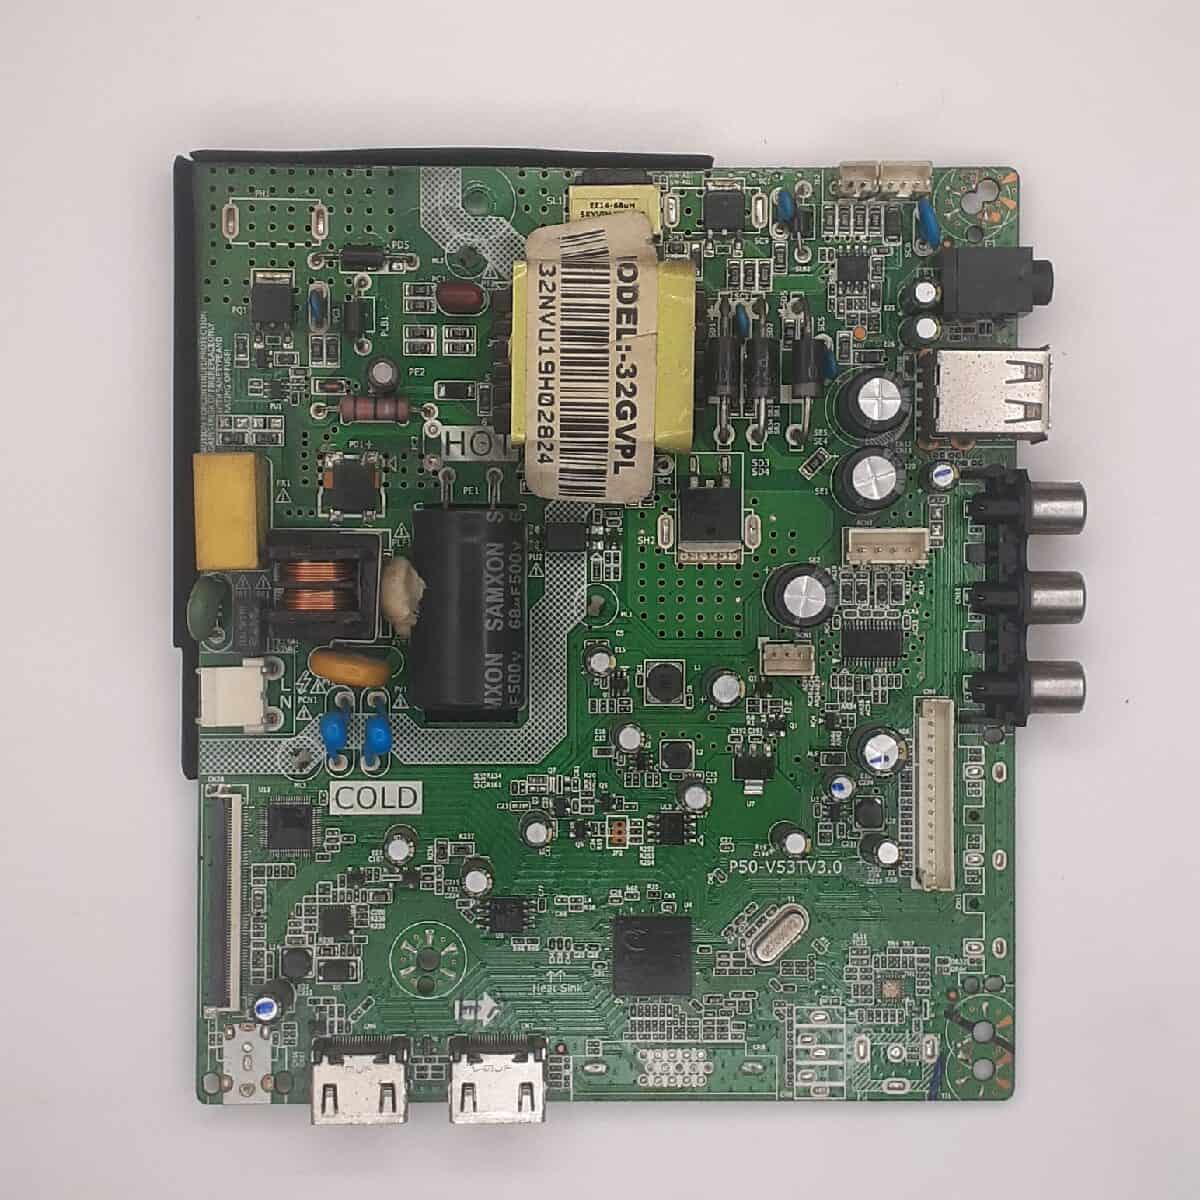 32GVPL VU MOTHERBOARD FOR LED TV